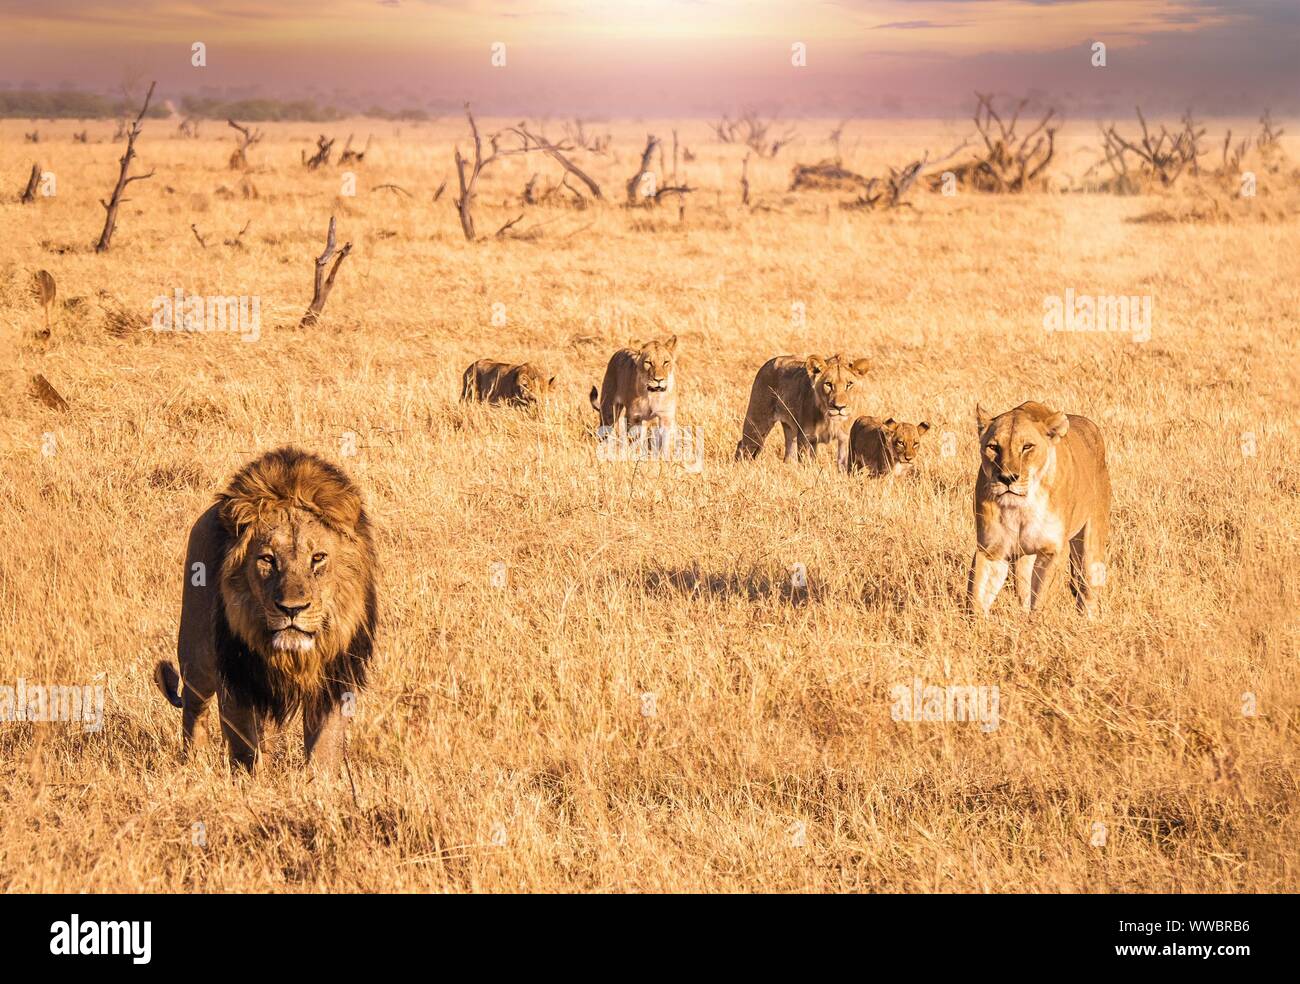 African safari scene where a male lion with a full mane is looking at the camera and moving through long dry grass with a lioness and four cubs that a Stock Photo